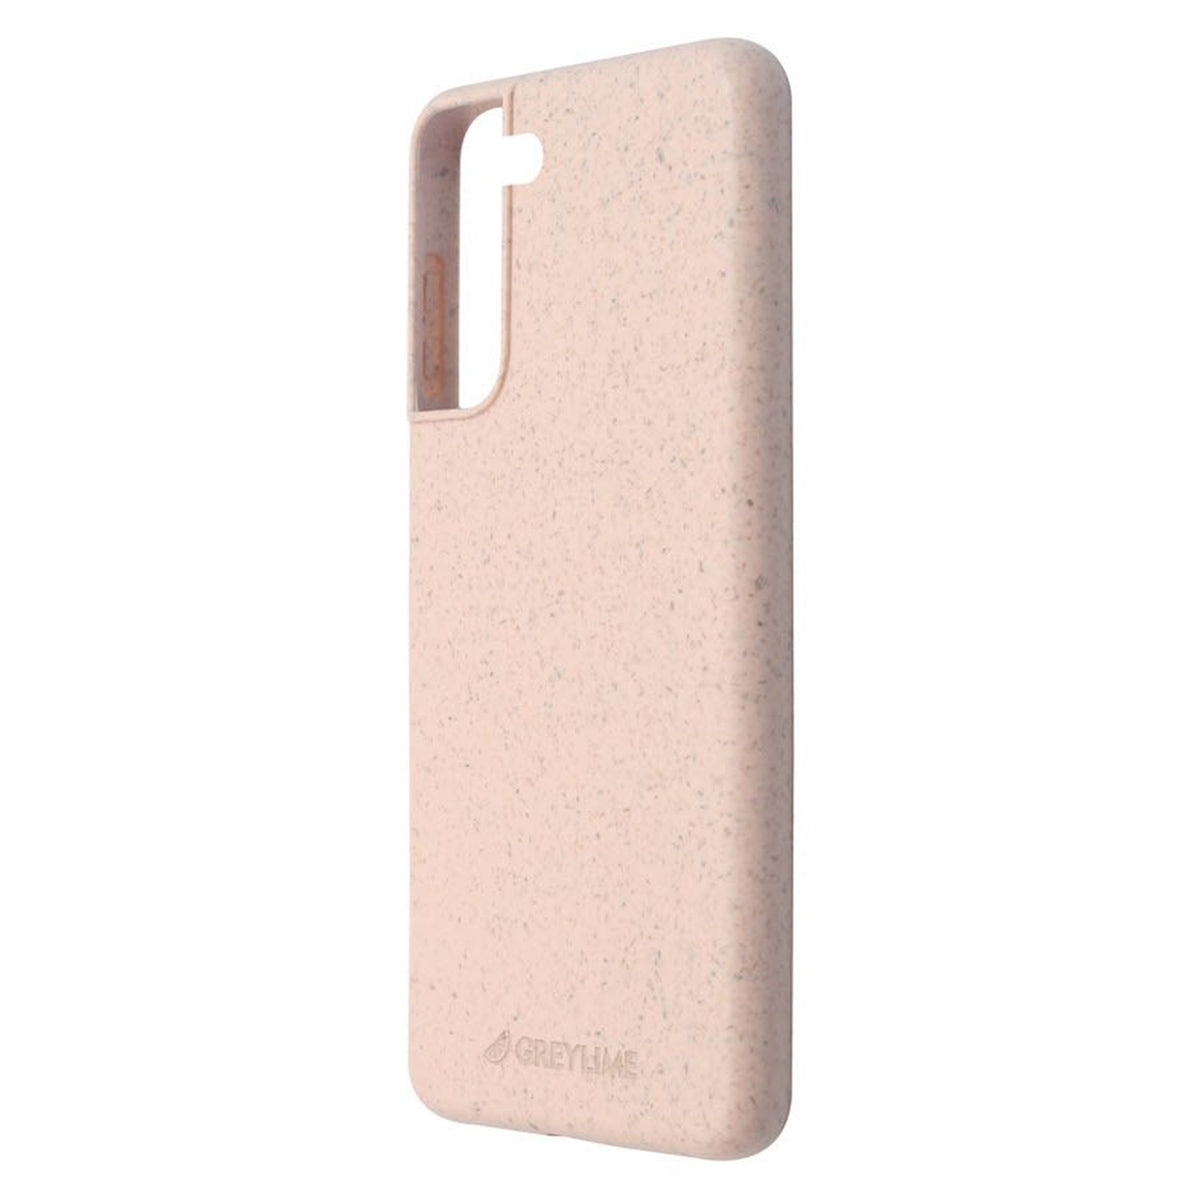 COSAM2204_GreyLime-Samsung-Galaxy-S22-Biodegradable-Cover-Pink_04.jpg